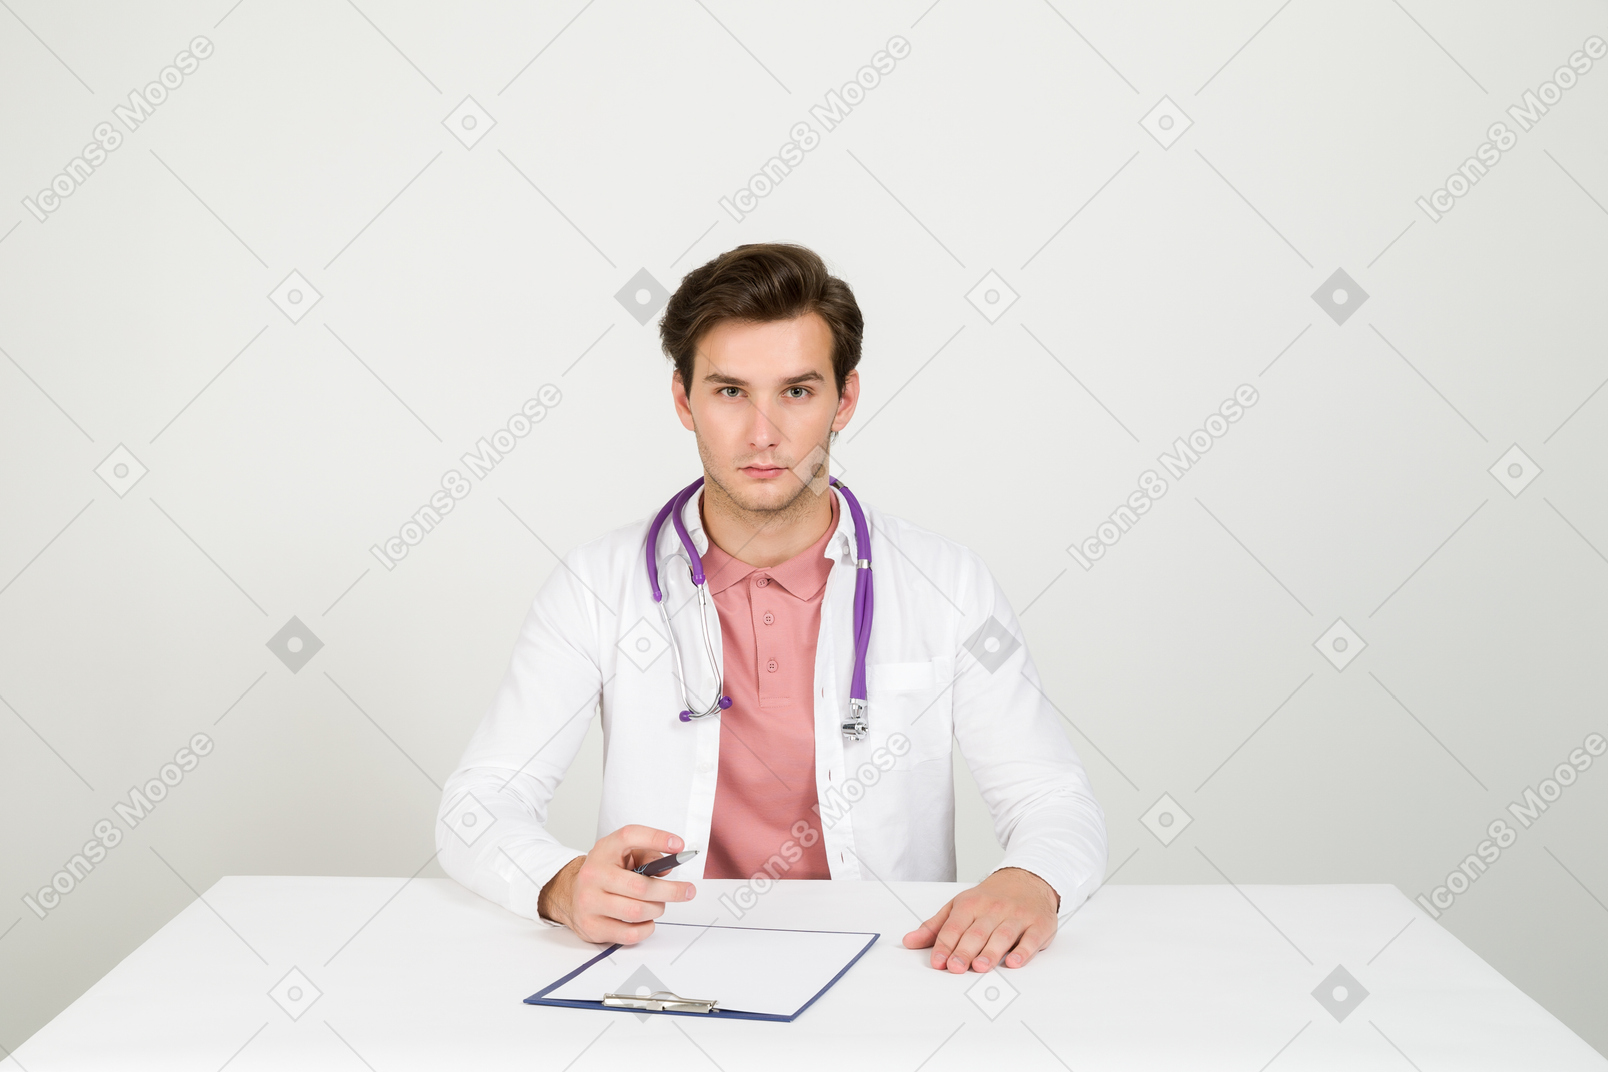 Medical work requires attention and concentration